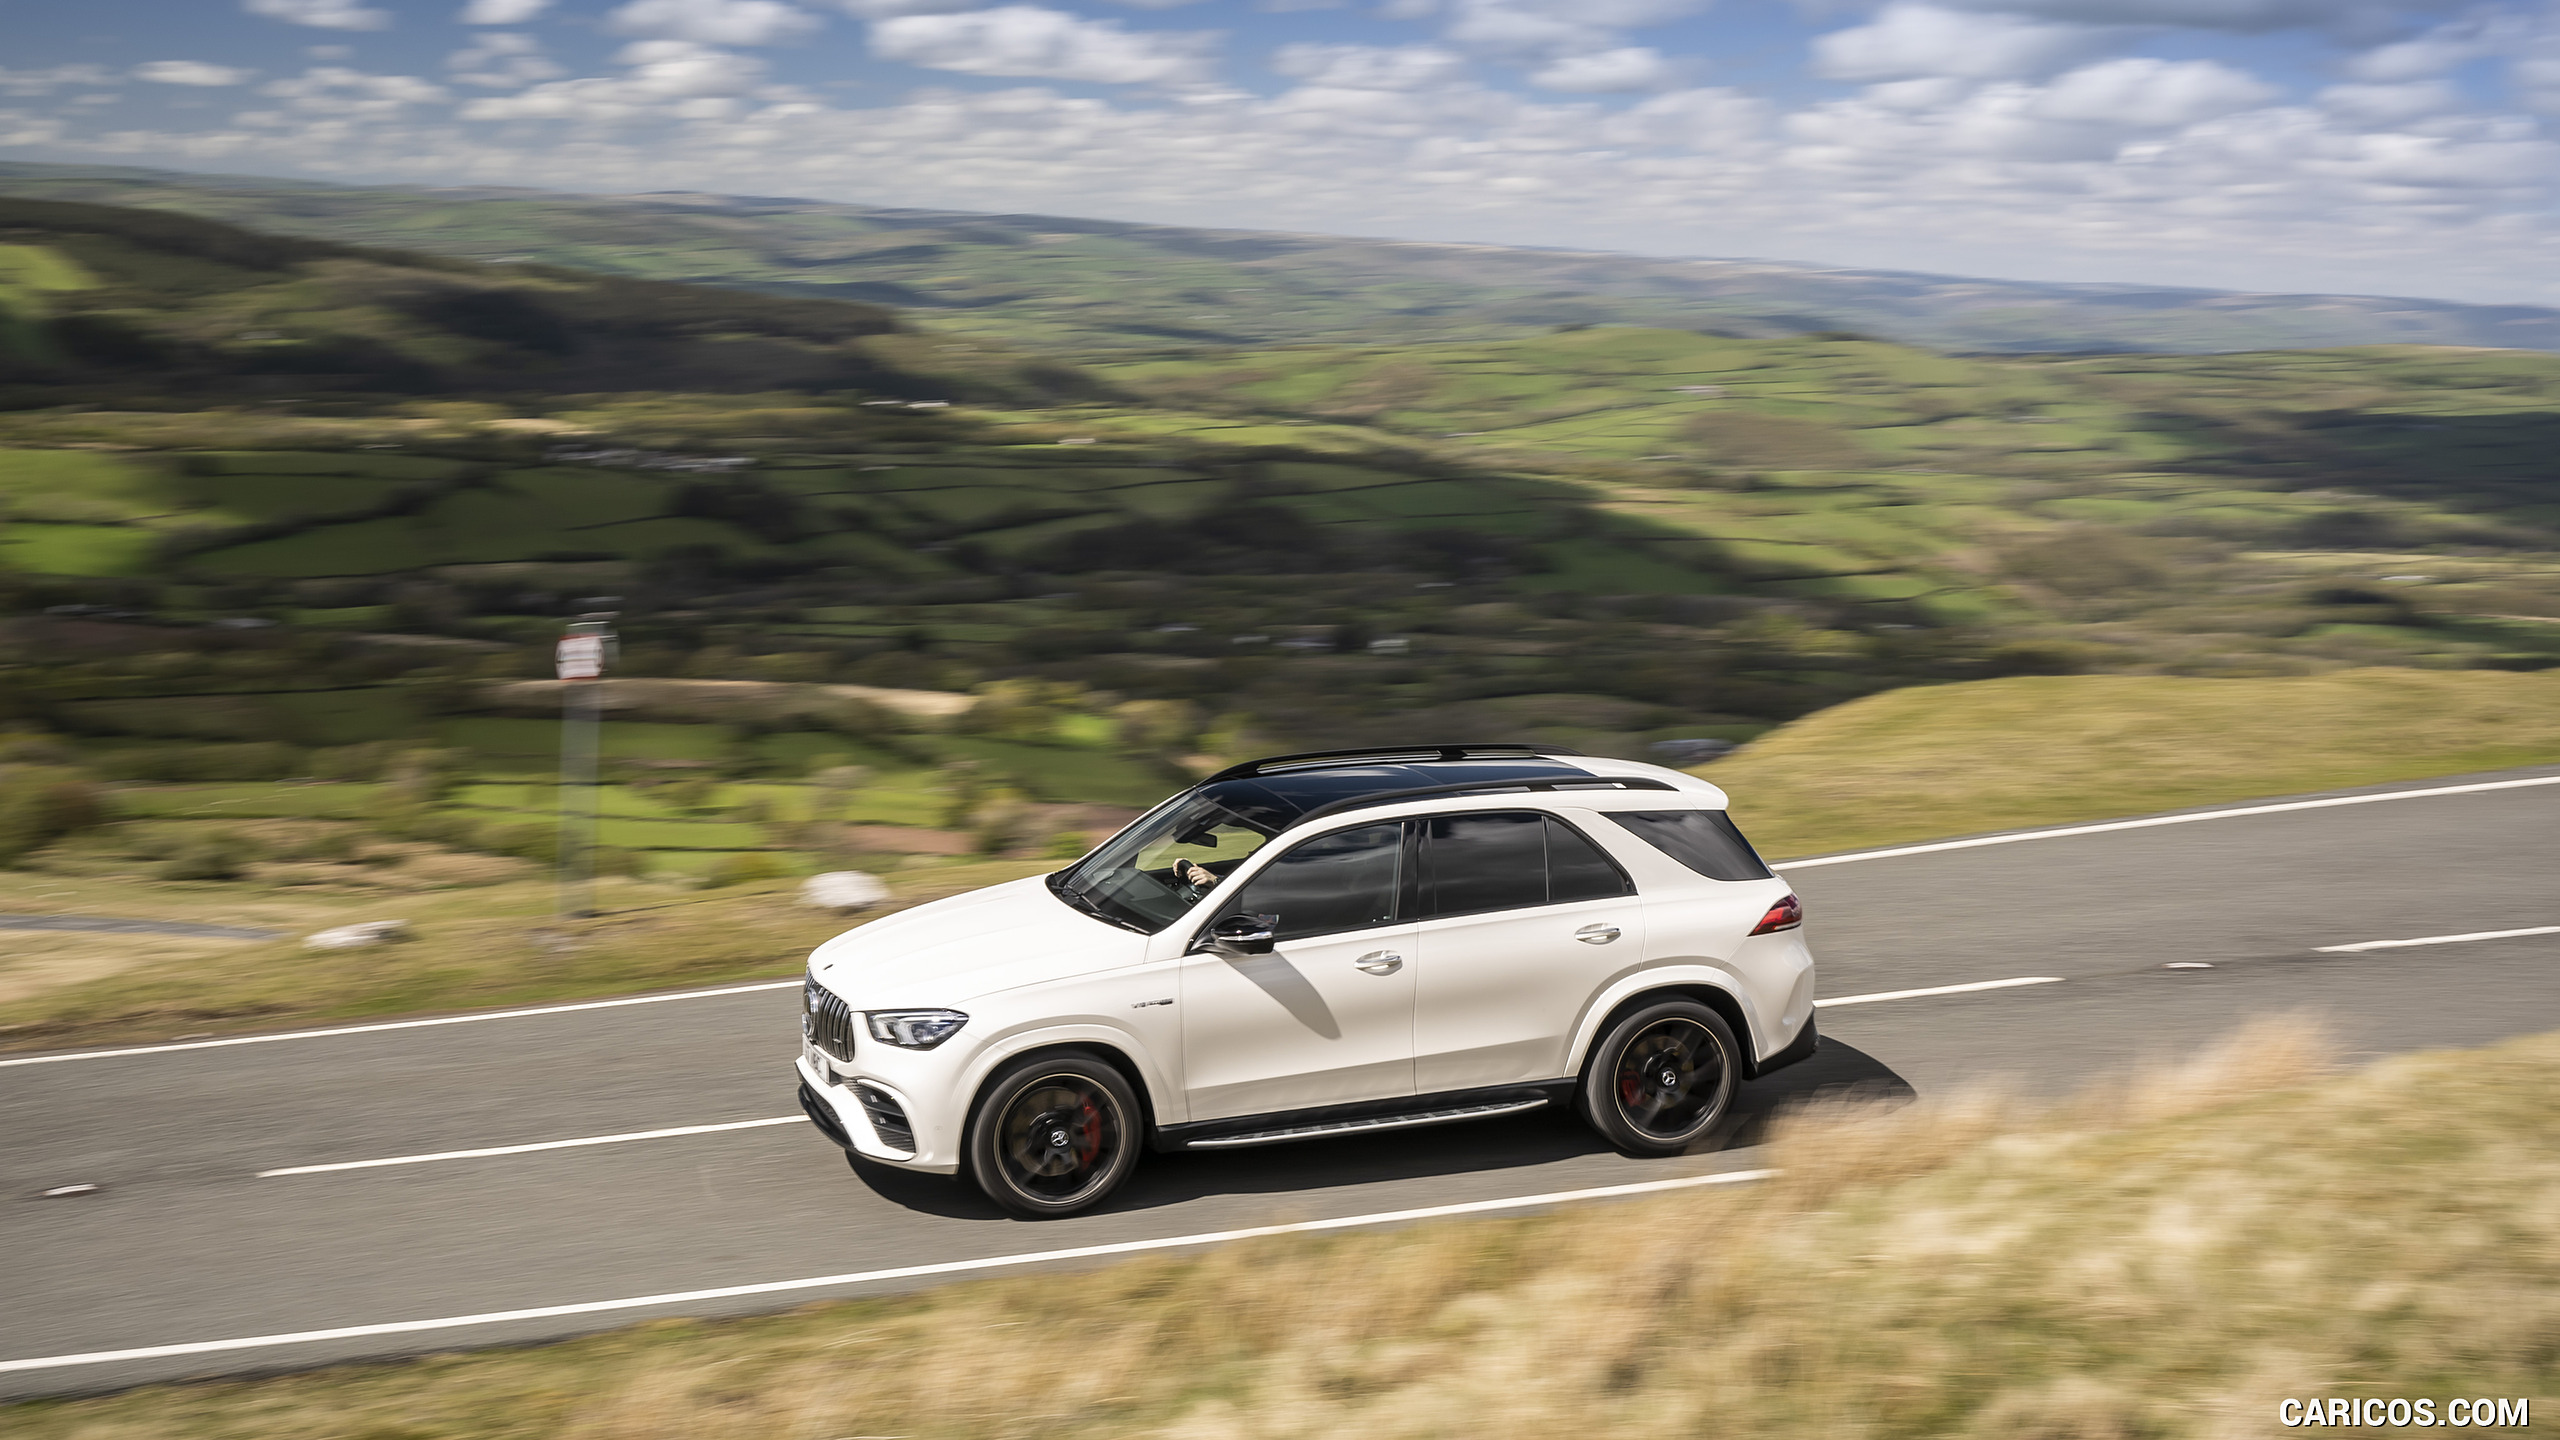 2021 Mercedes-AMG GLE 63 S 4MATIC (UK-Spec) - Side, #113 of 187